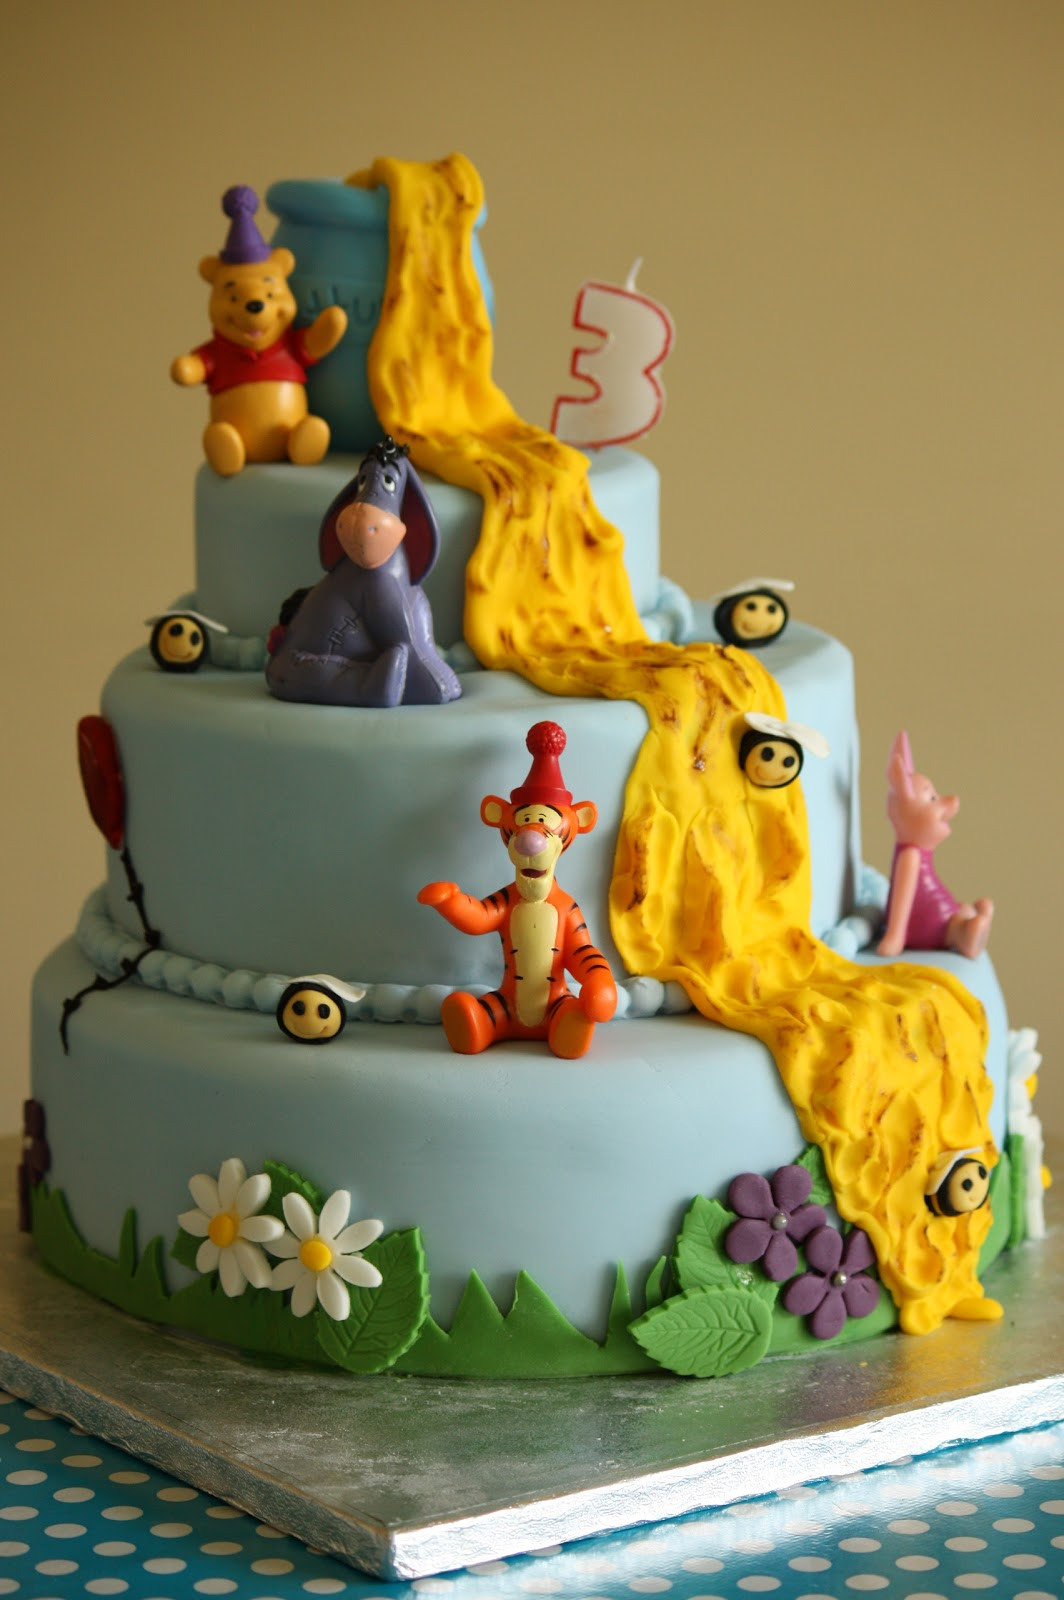 Winnie The Pooh Birthday Cakes
 Mellow Mummy The one with the epic Winnie the Pooh